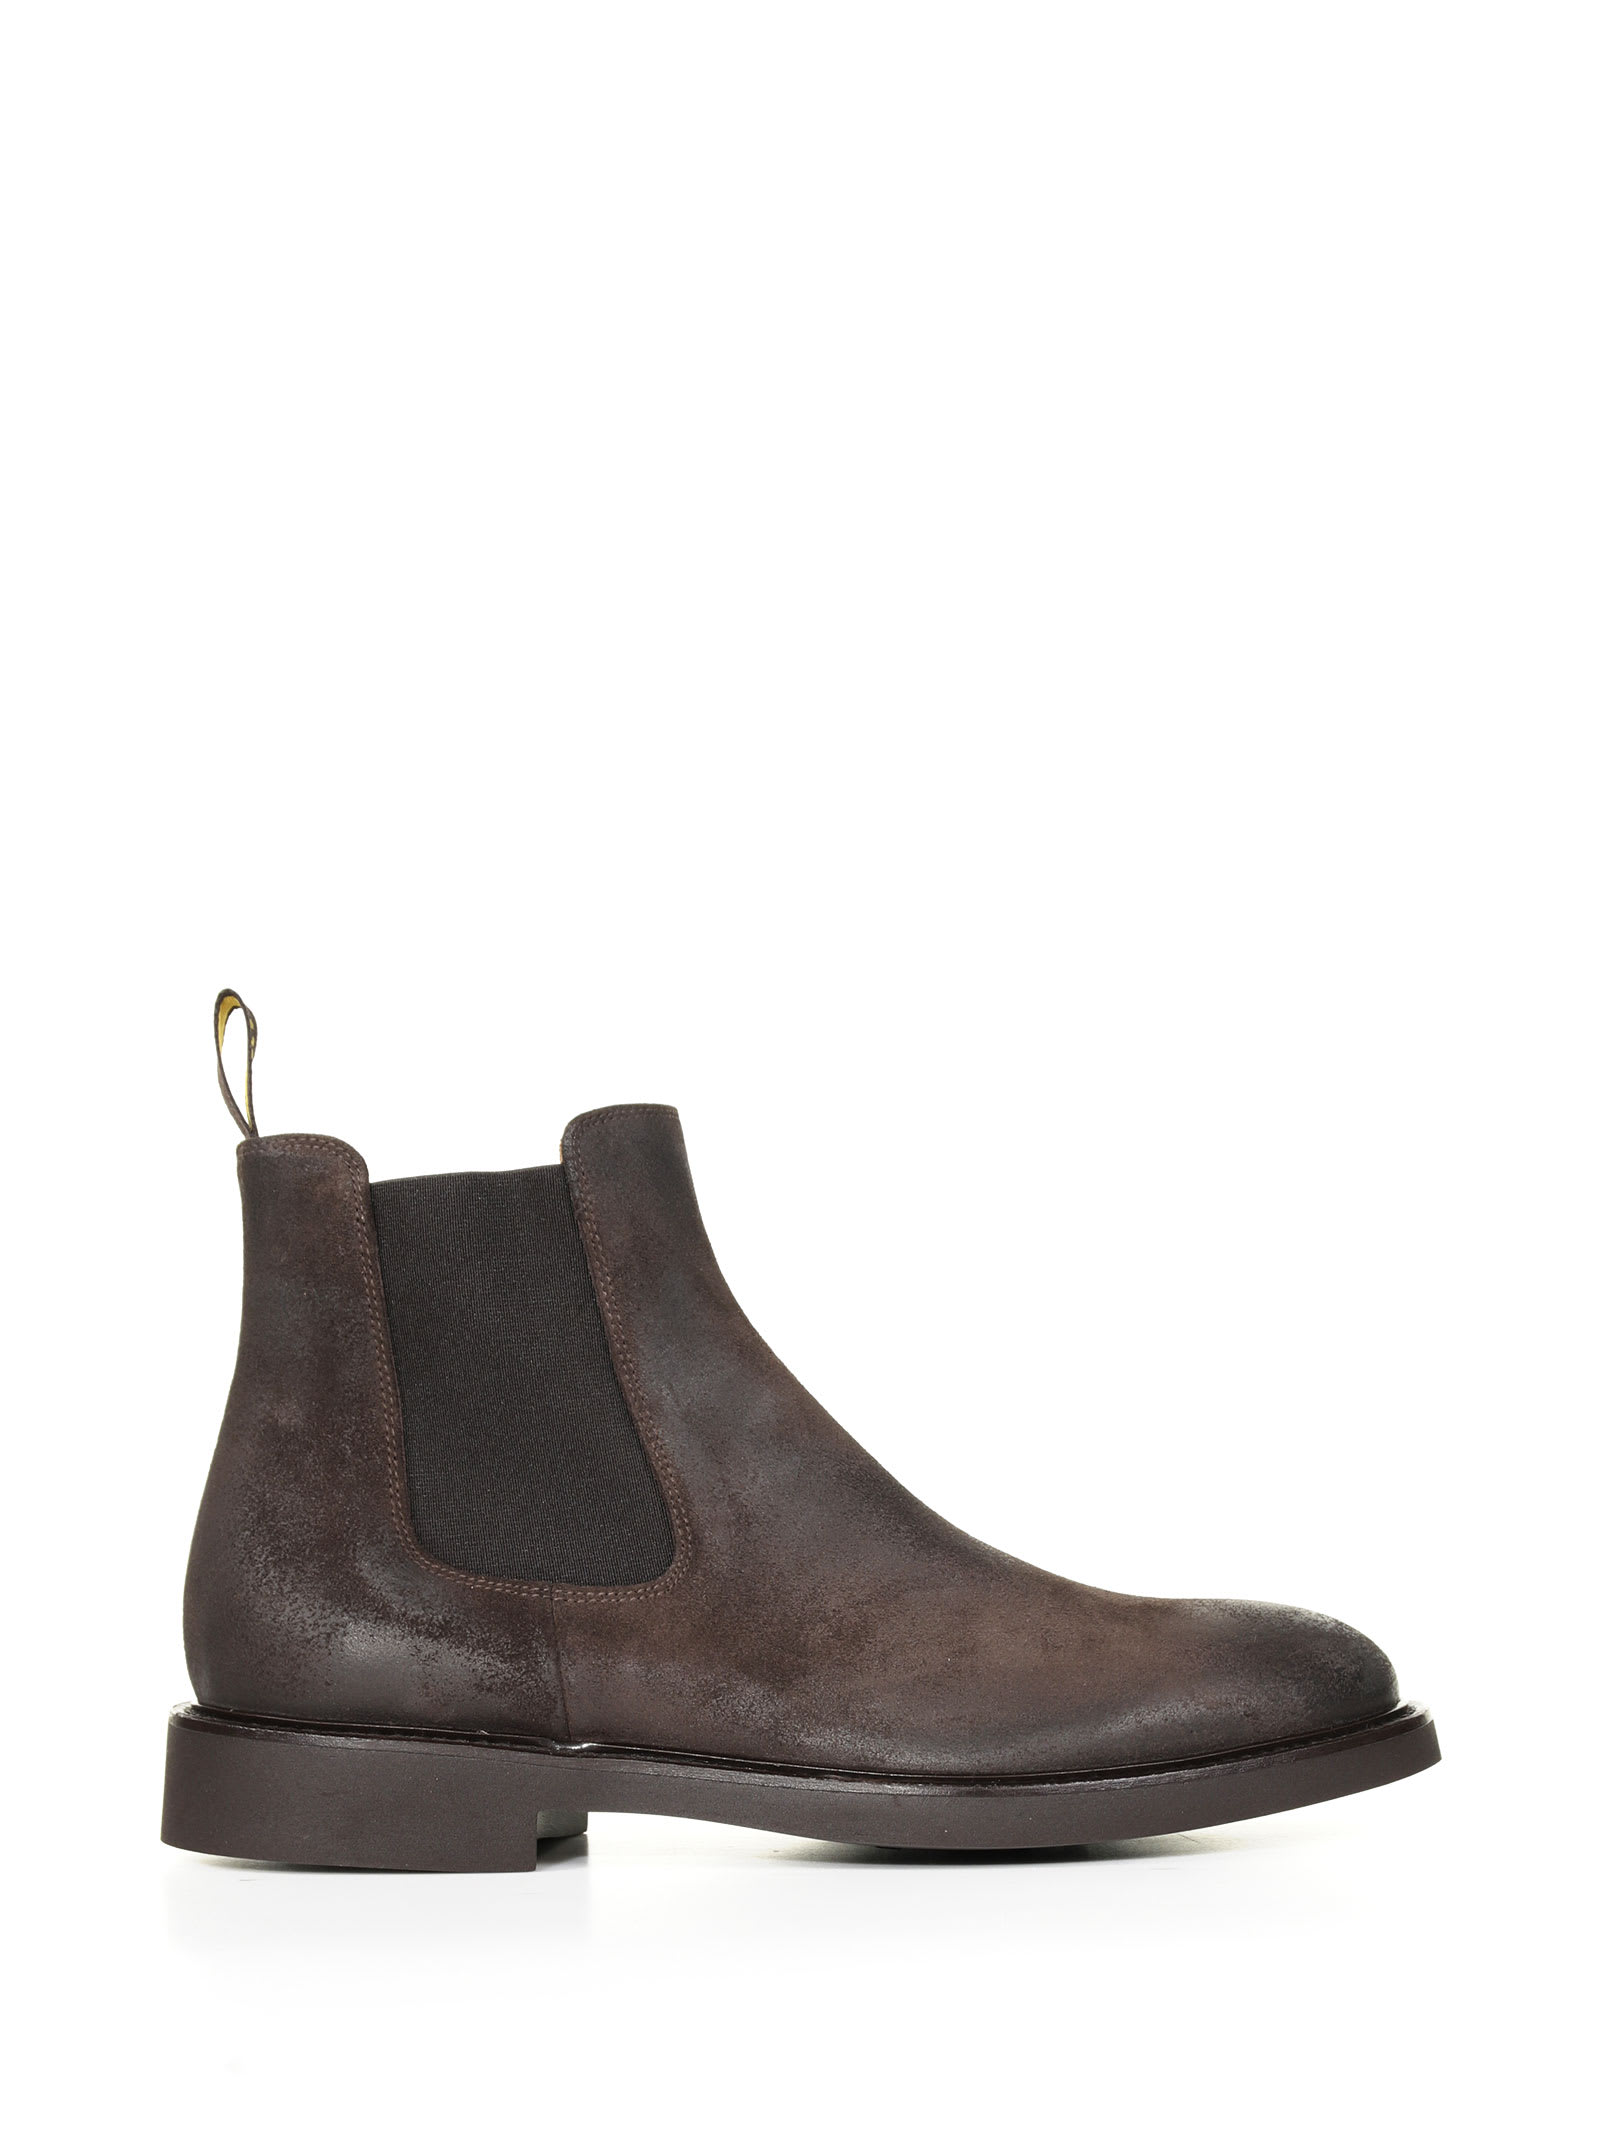 Doucal's Suede Ankle Boot